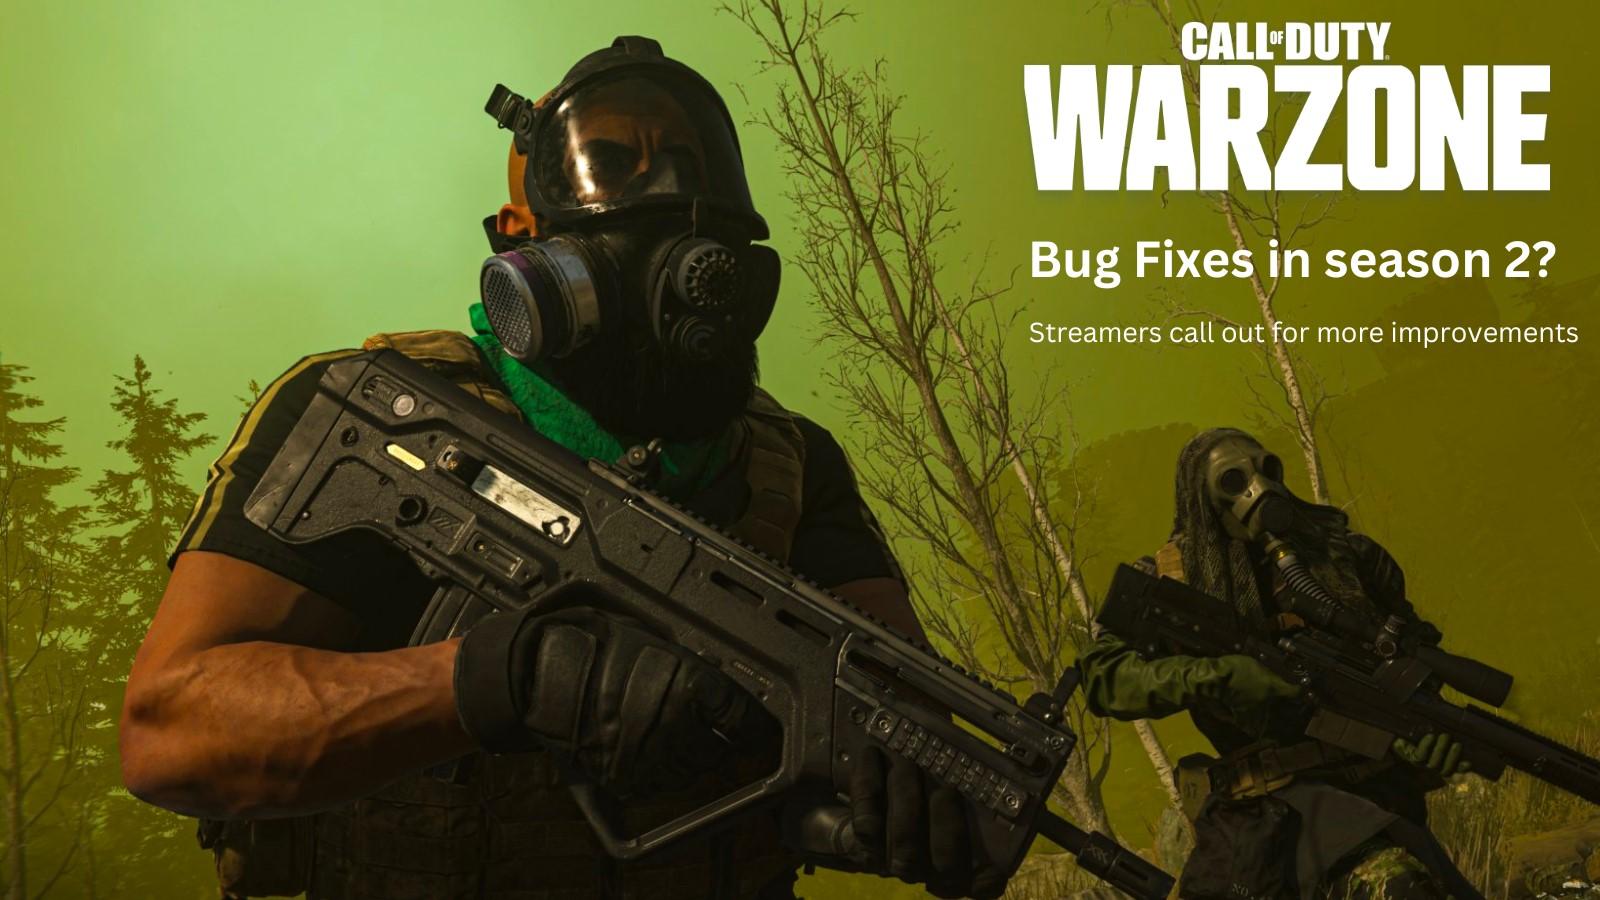 Streamers want fixes to bugs and more improvements in Warzone 2.